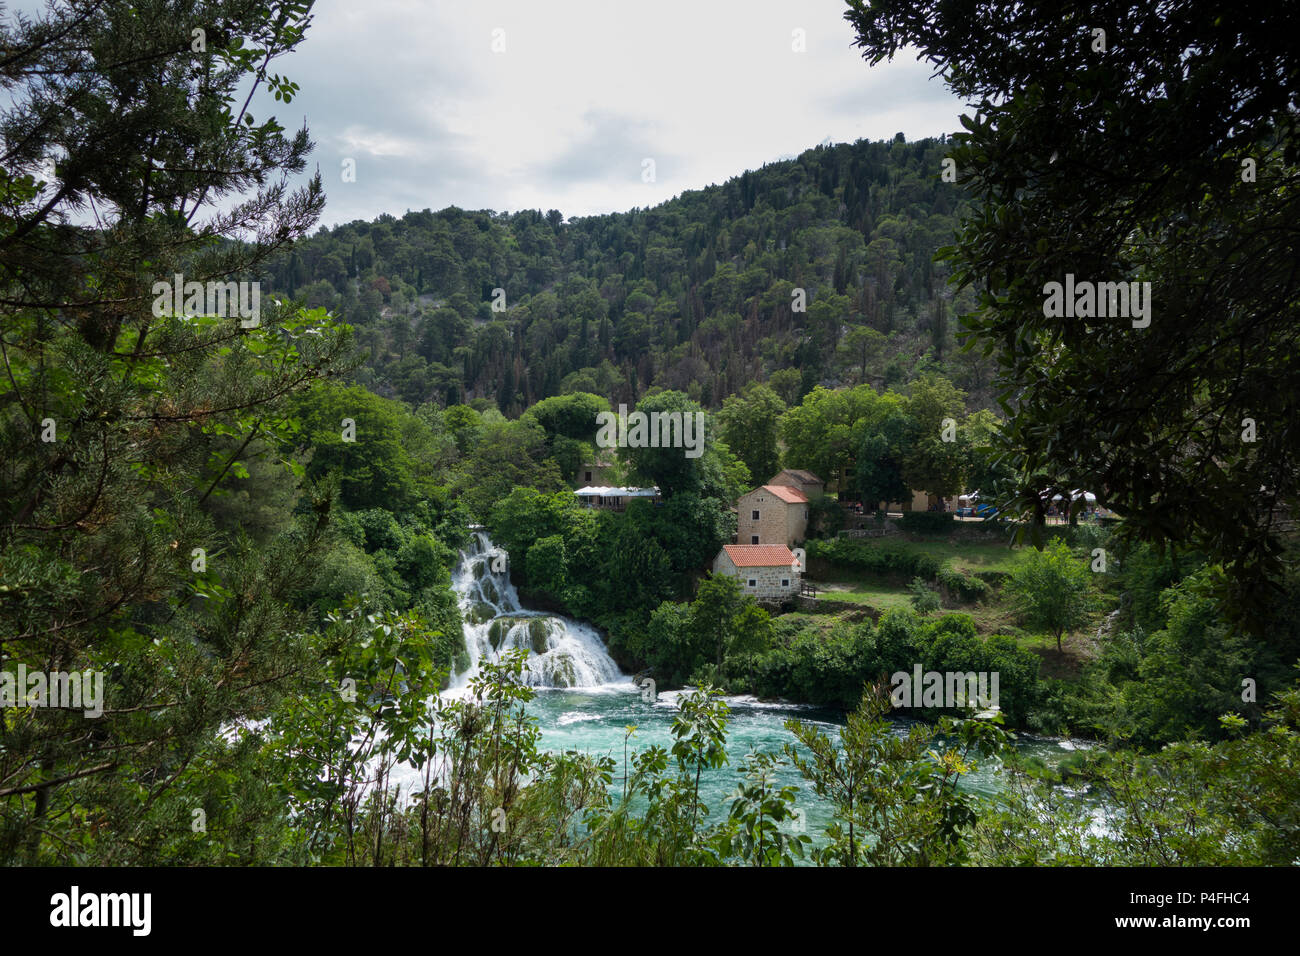 View of a waterfall and lake in Krka national park, Croatia, with a building in the background Stock Photo